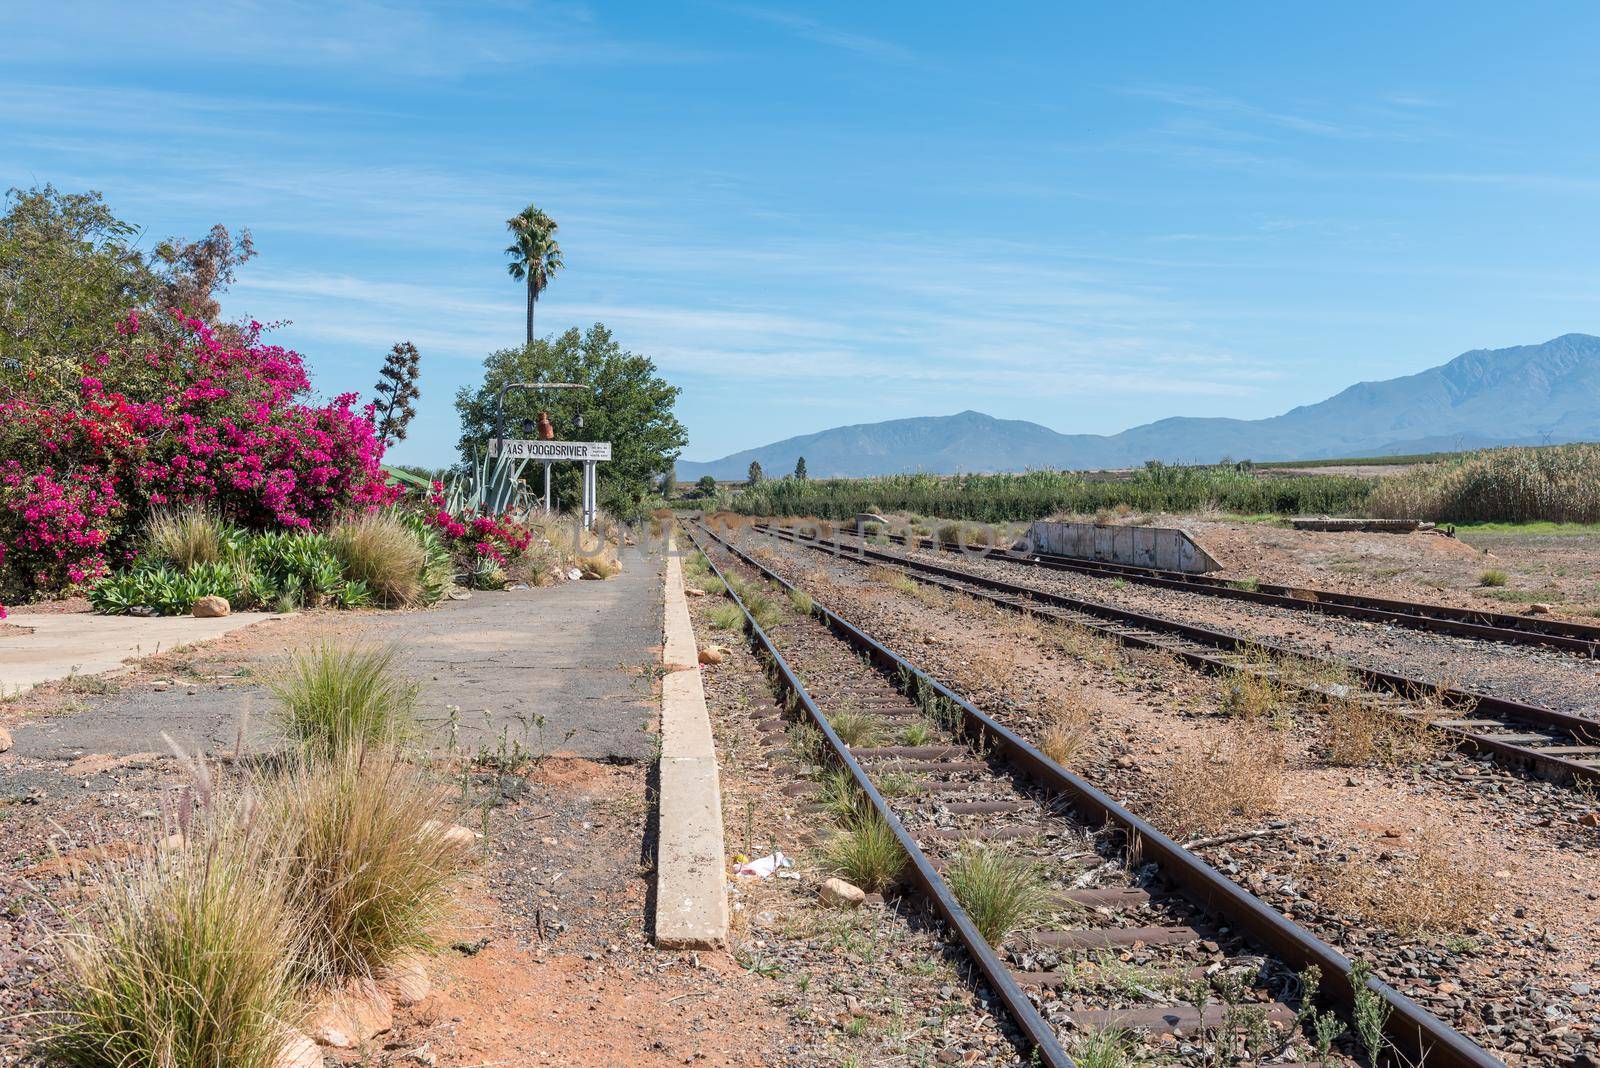 Klaas Voogdsrivier railway station near Ashton in the Western Cape Province. Tracks, a name board and flowers are visible